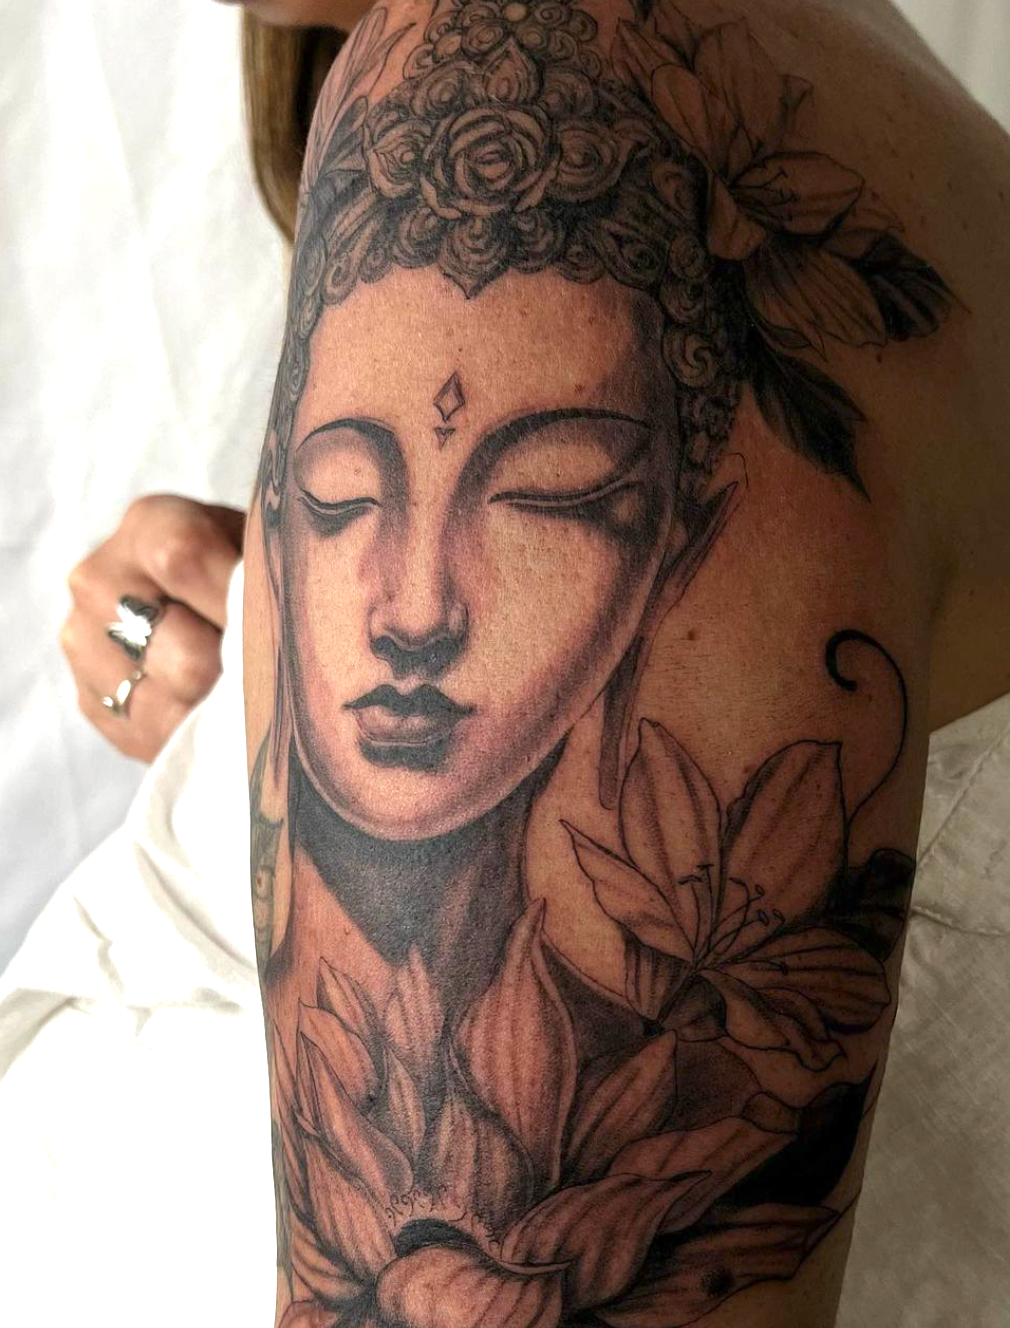 Online Tattoo Workshop "Micro-realistic Dot Work" with Macarena in Buenos Aires, Argentina by subcultours